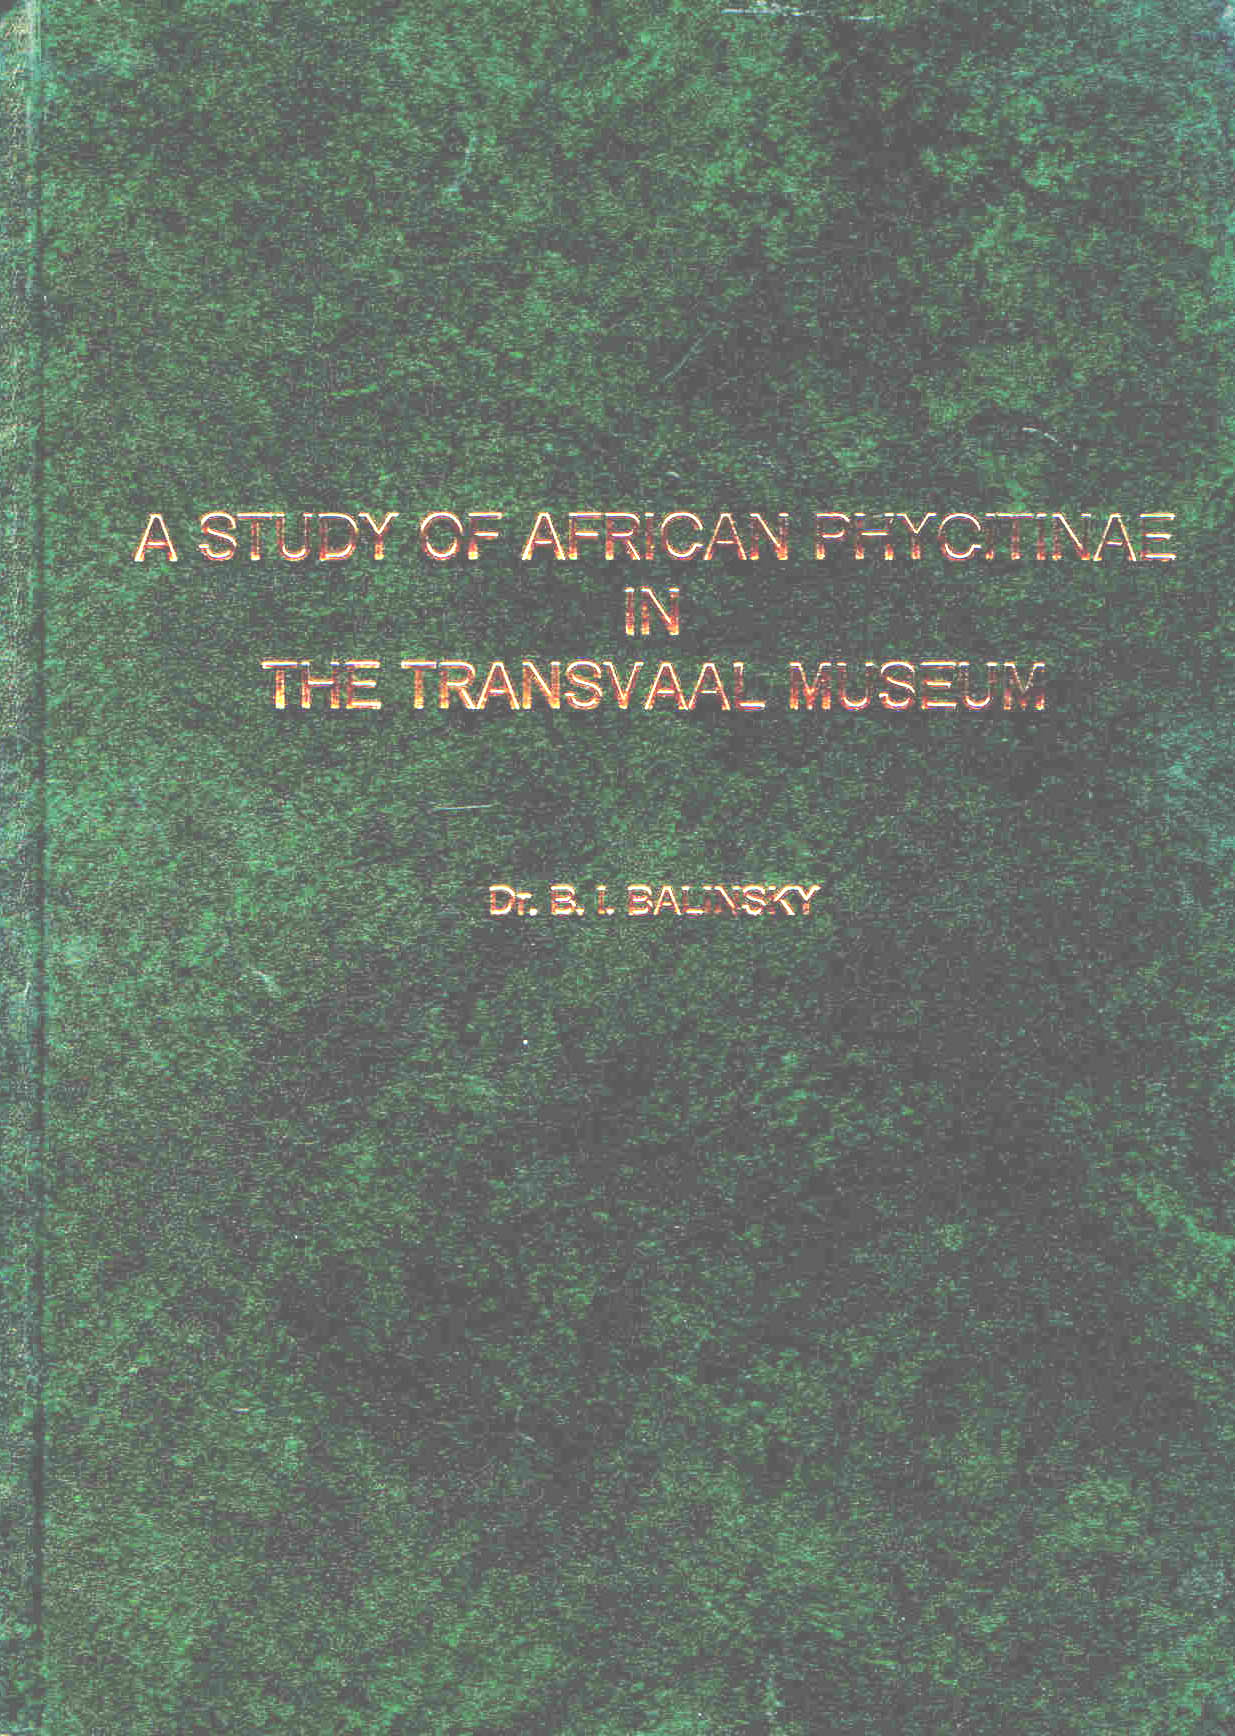 Balinsky, B.I. - A Study of African Phycitinae in the Transvaal Museum